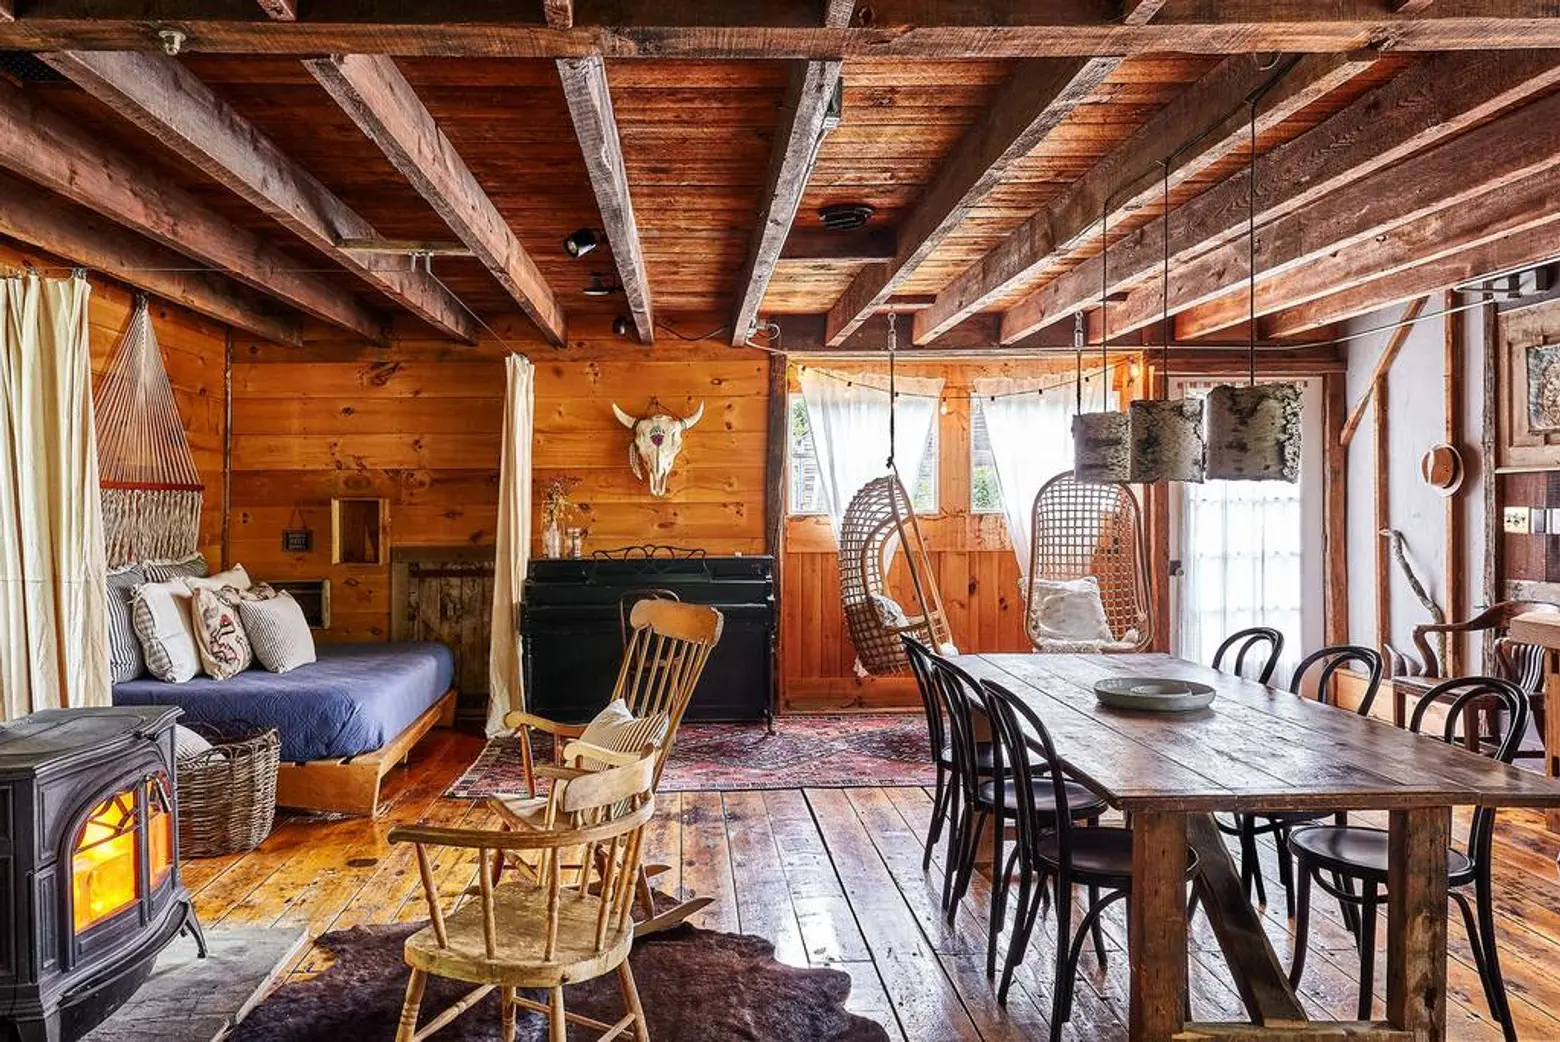 This charming upstate barn has enough warmth for a winter weekend at $255 a night